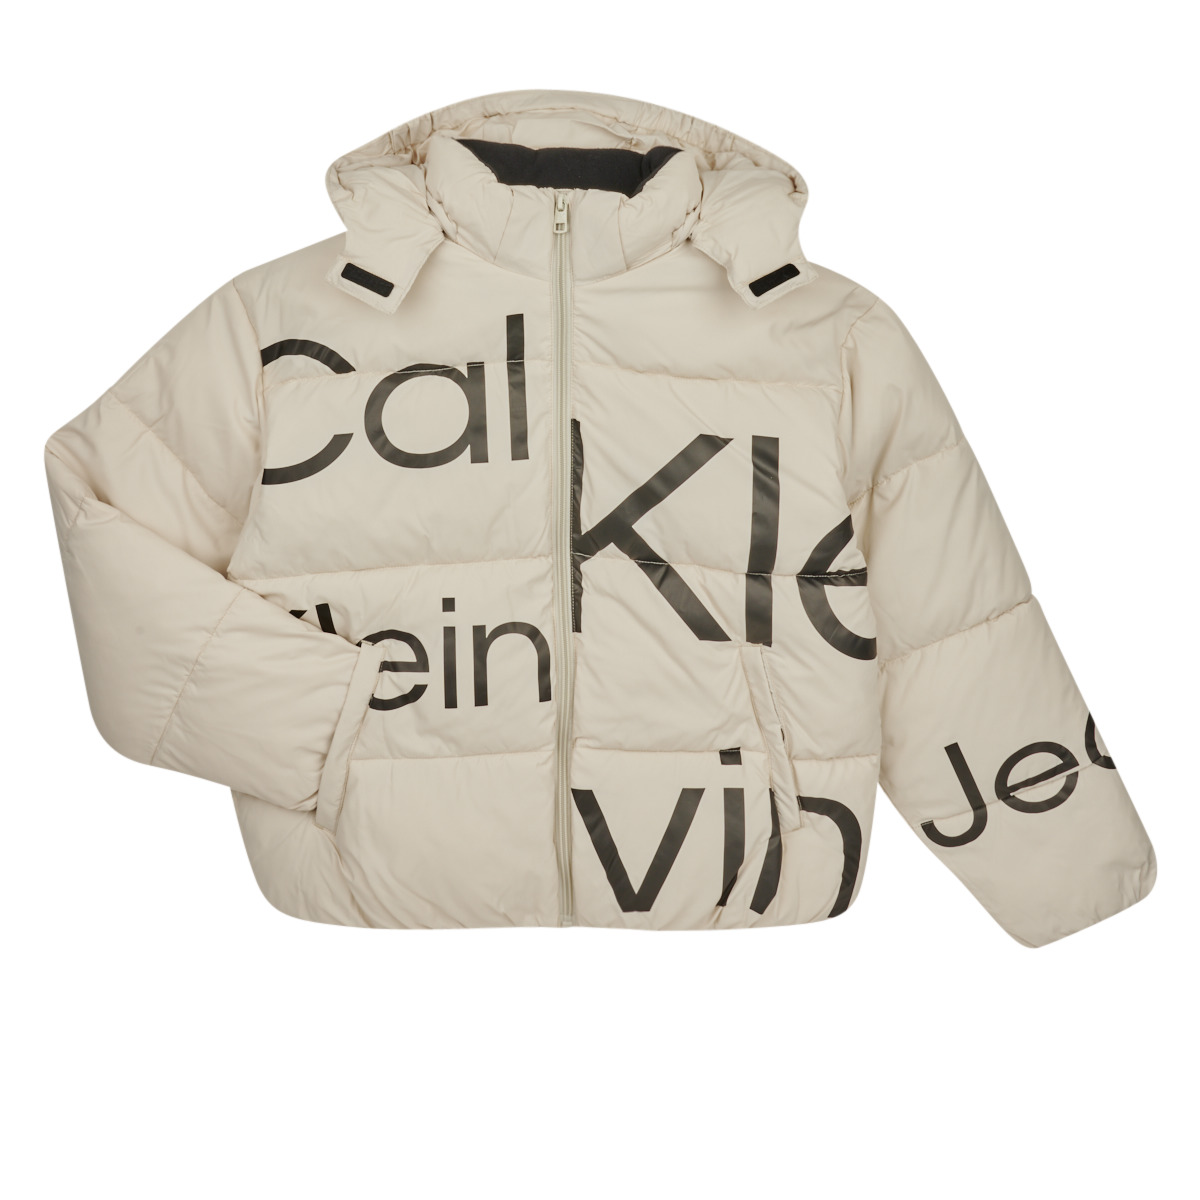 Calvin Klein Jeans Spartoo coats INSTITUTIONAL Child LOGO - € PUFFER 176,00 Fast White - JACKET ! Duffel BOLD Europe Clothing | delivery